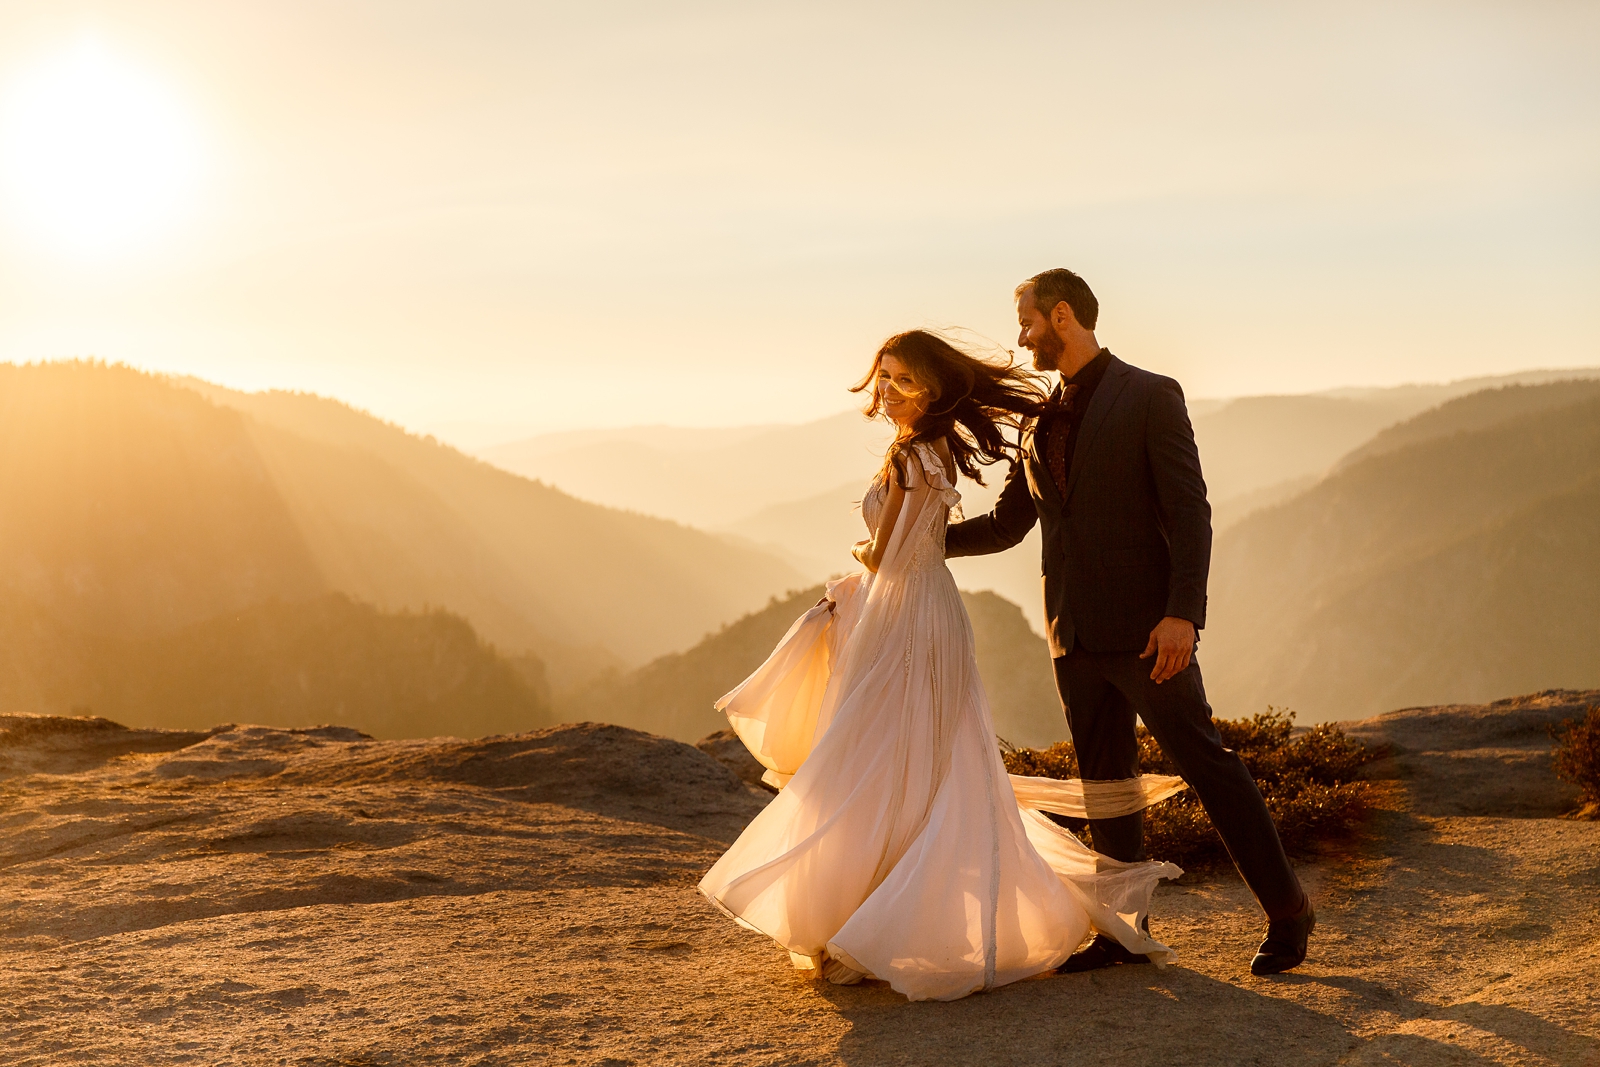 Wedding dress spin at this couple's Yosemite sunset elopement.